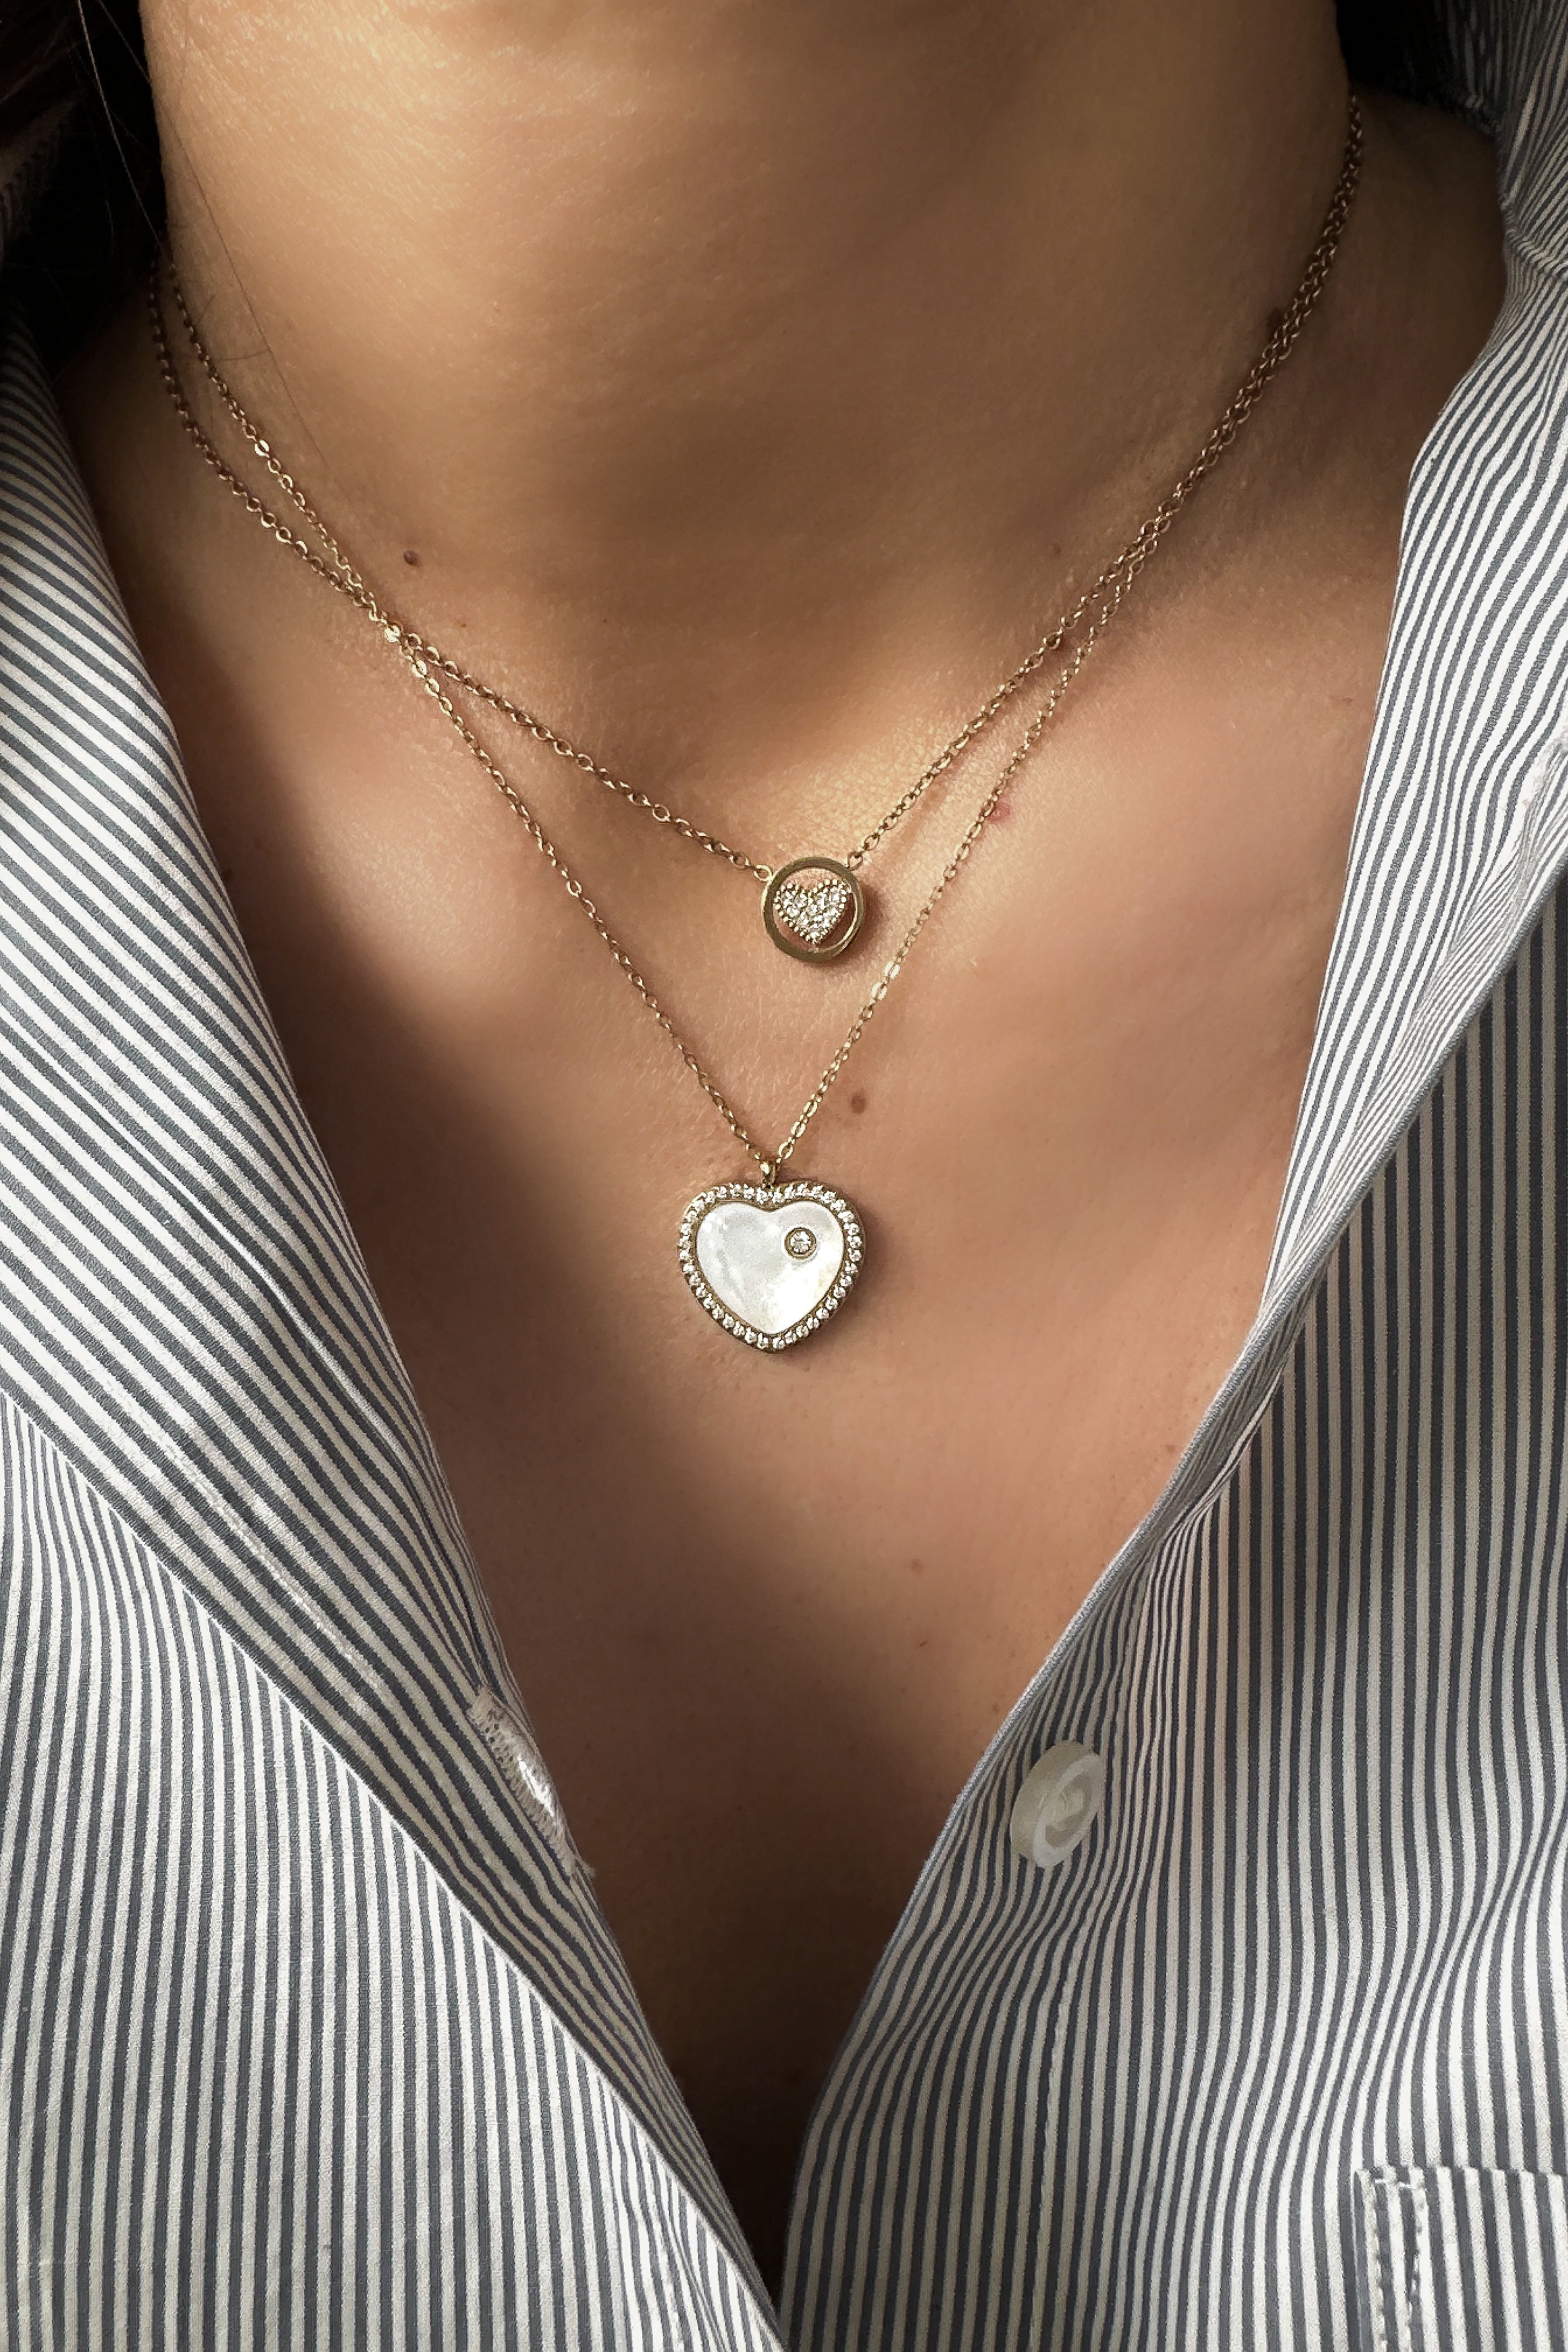 Rosie Necklace - Boutique Minimaliste has waterproof, durable, elegant and vintage inspired jewelry